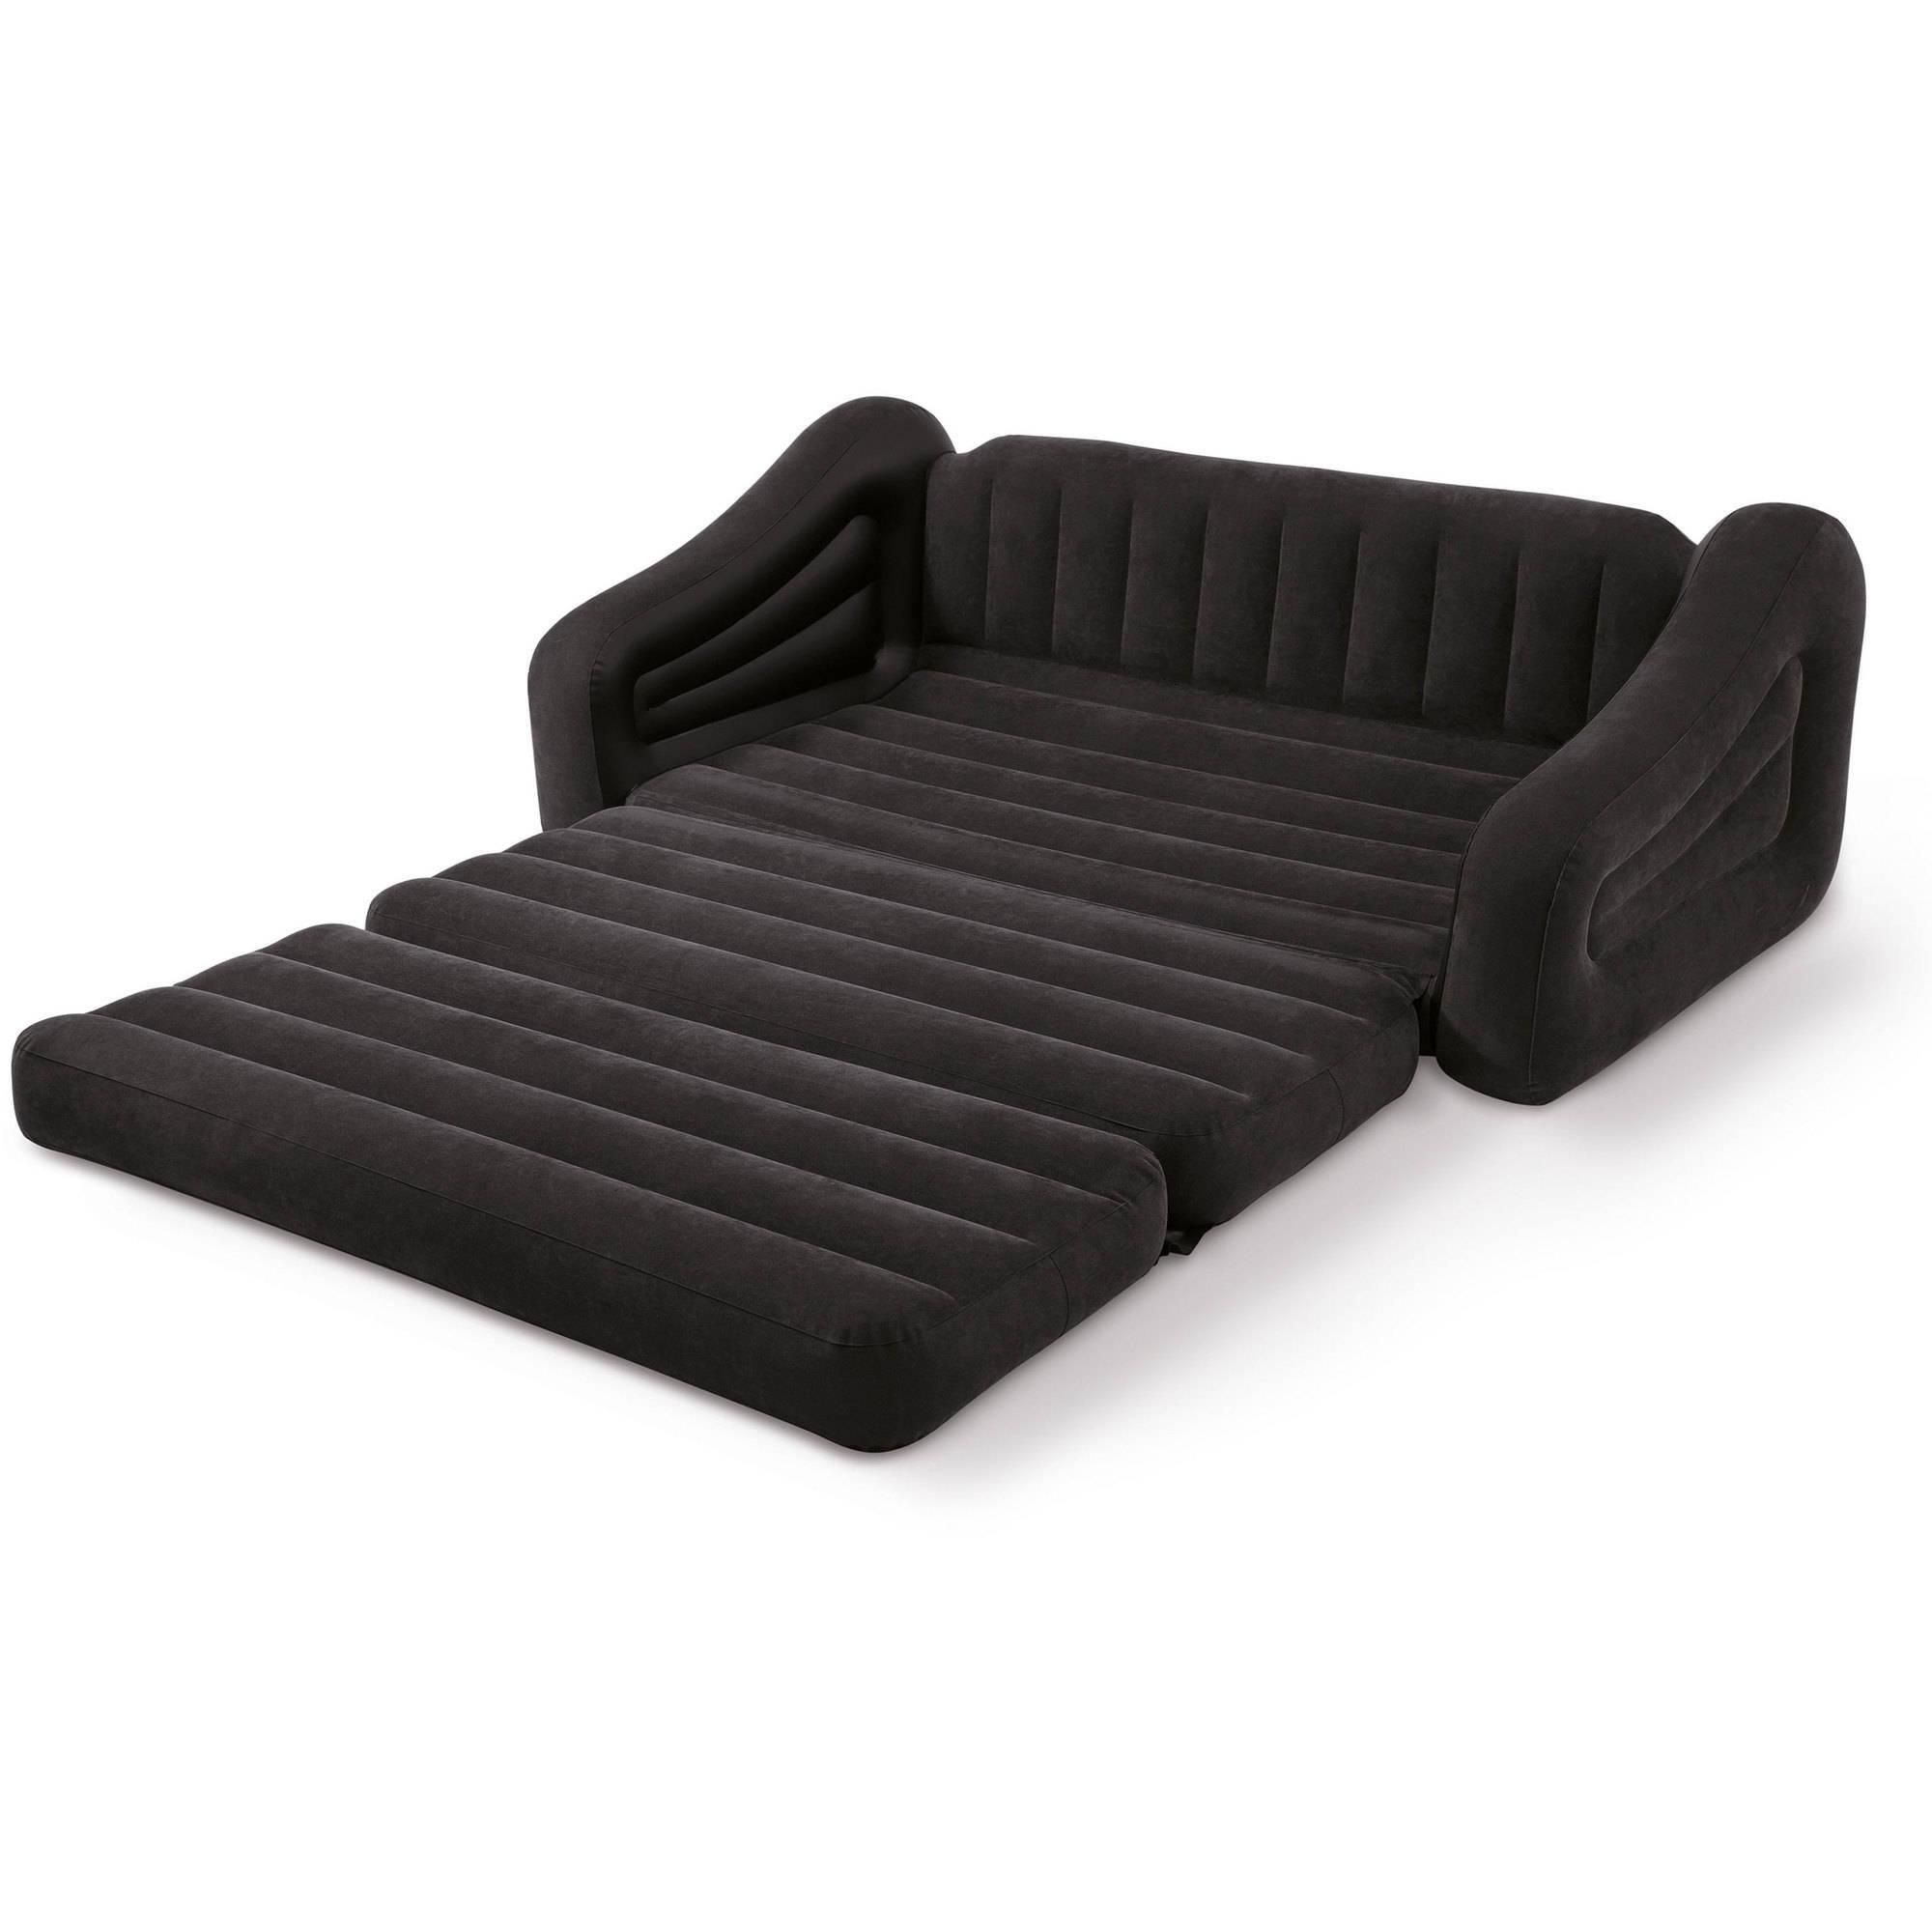 Intex Queen Inflatable Pull Out Sofa Bed – Walmart For Intex Queen Sleeper Sofas (View 8 of 20)